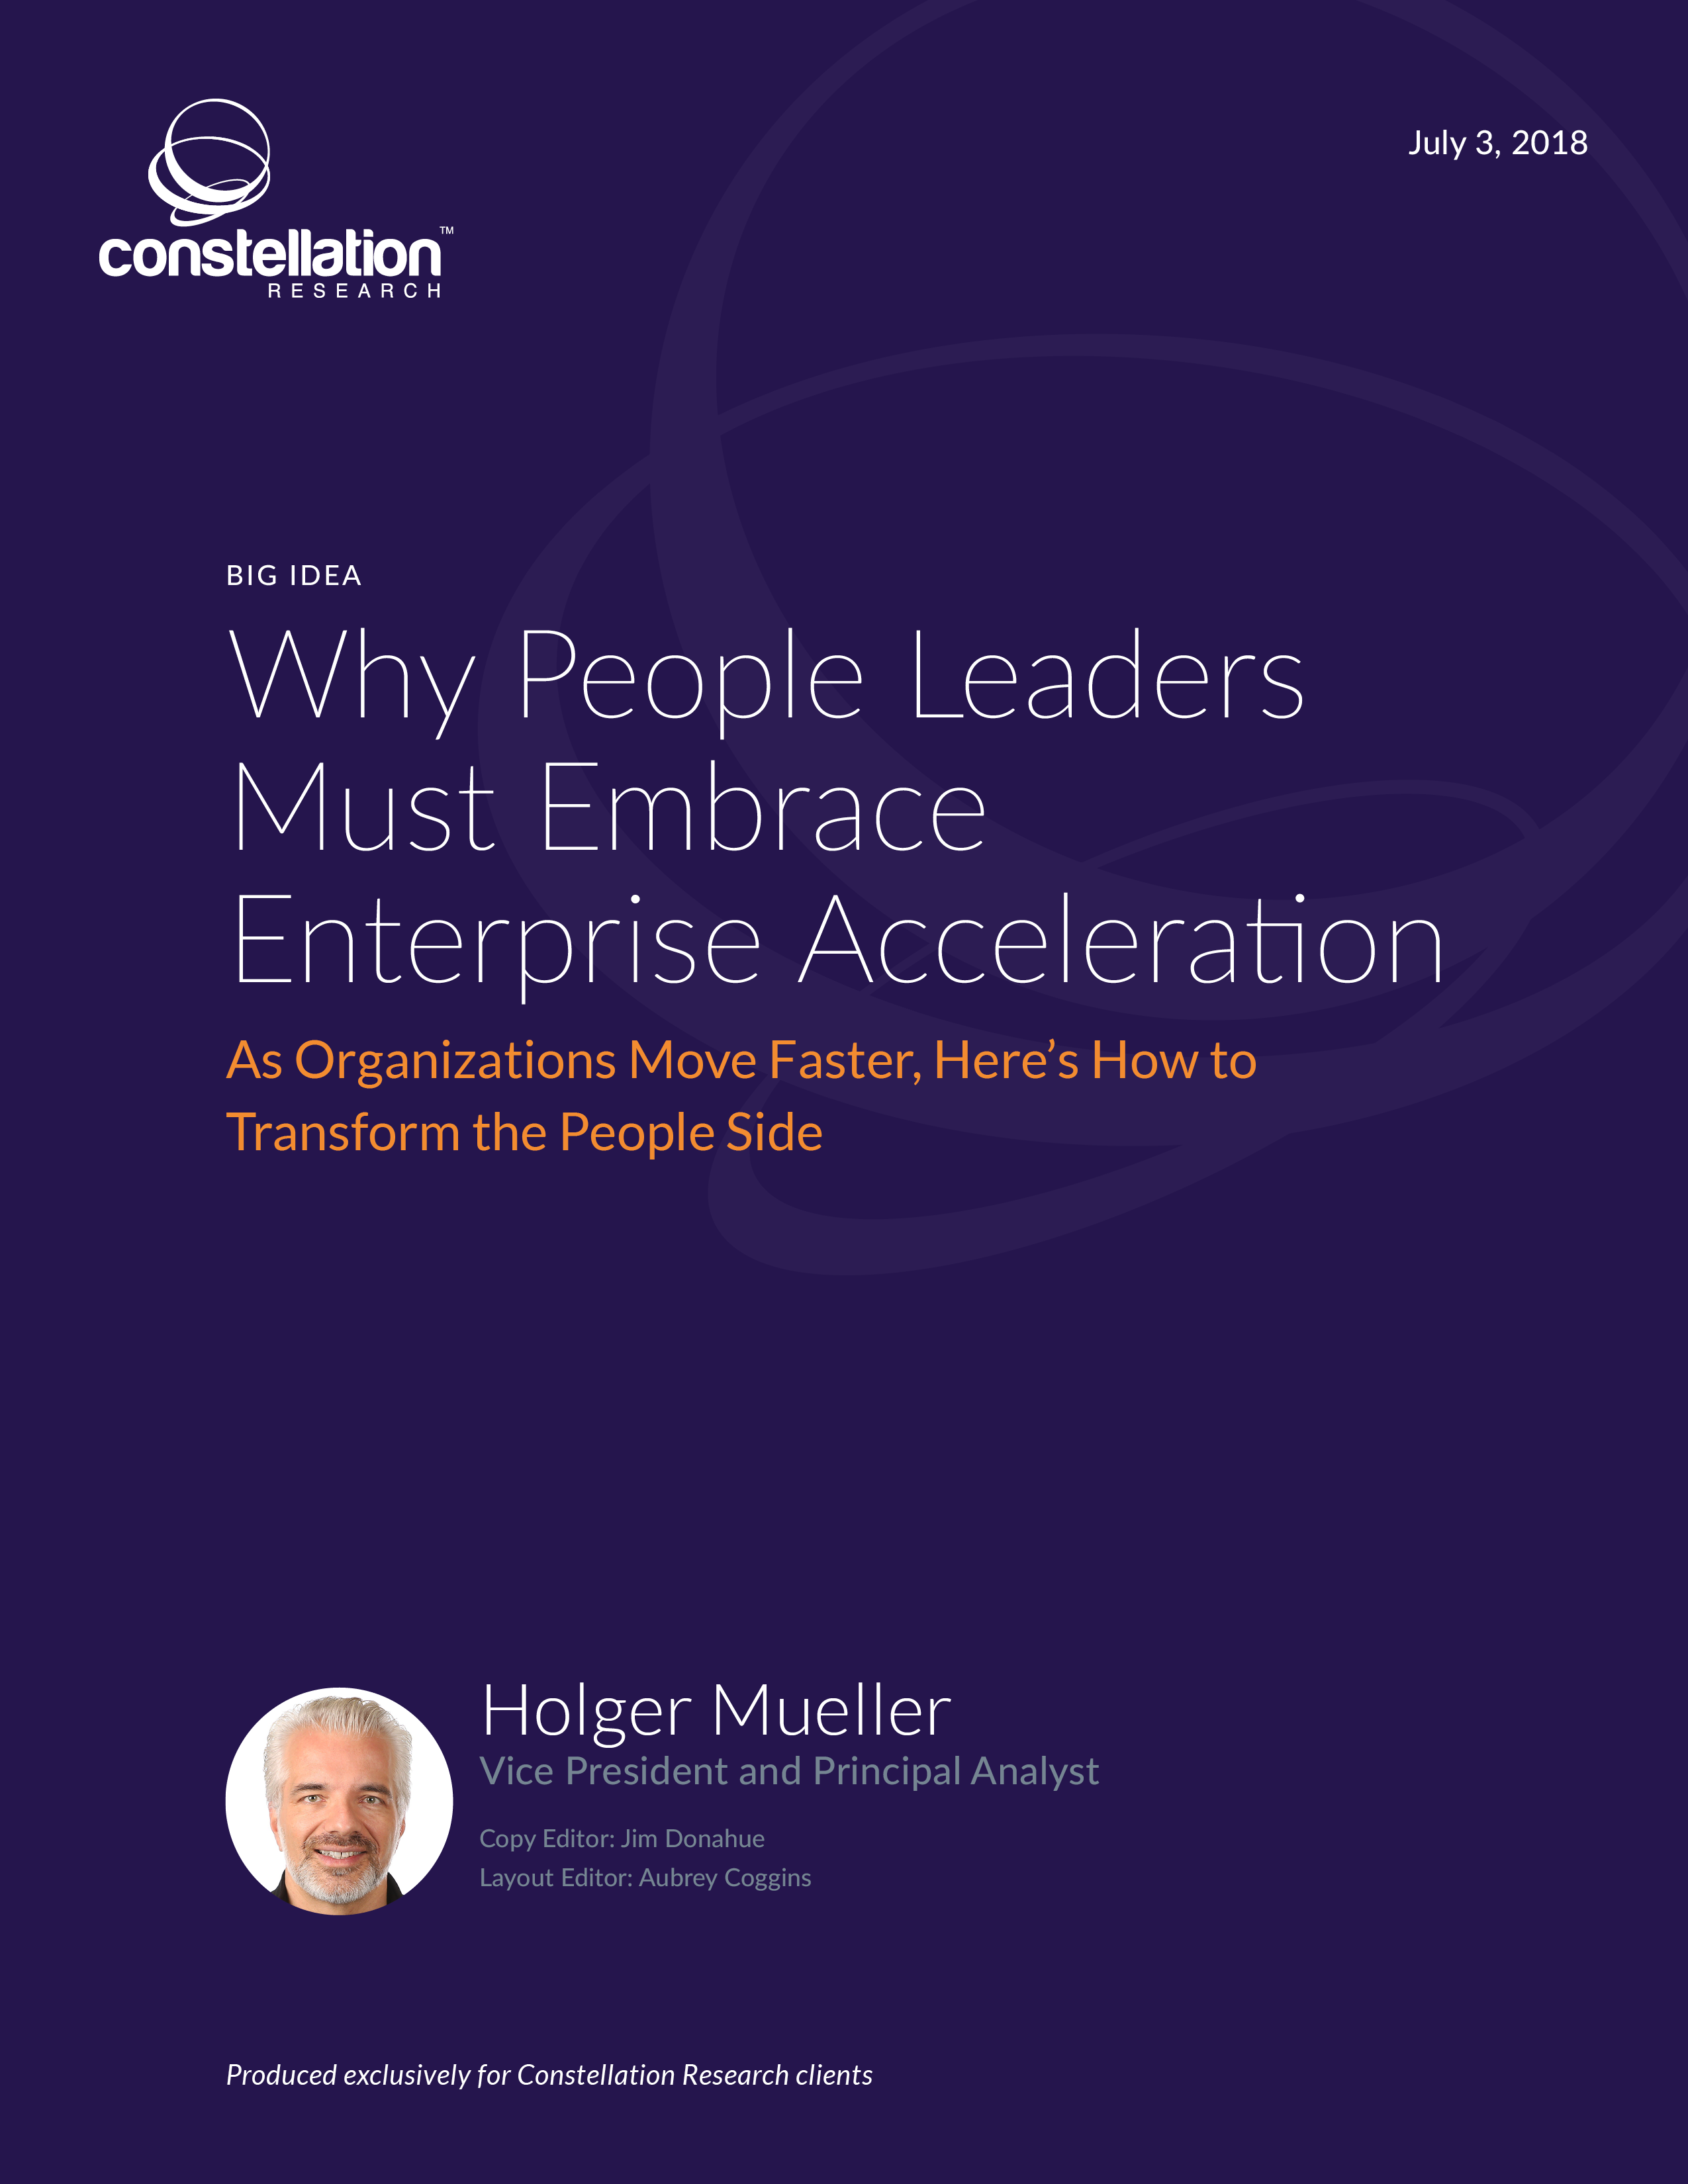 Why People Leaders Must Embrace Enterprise Acceleration